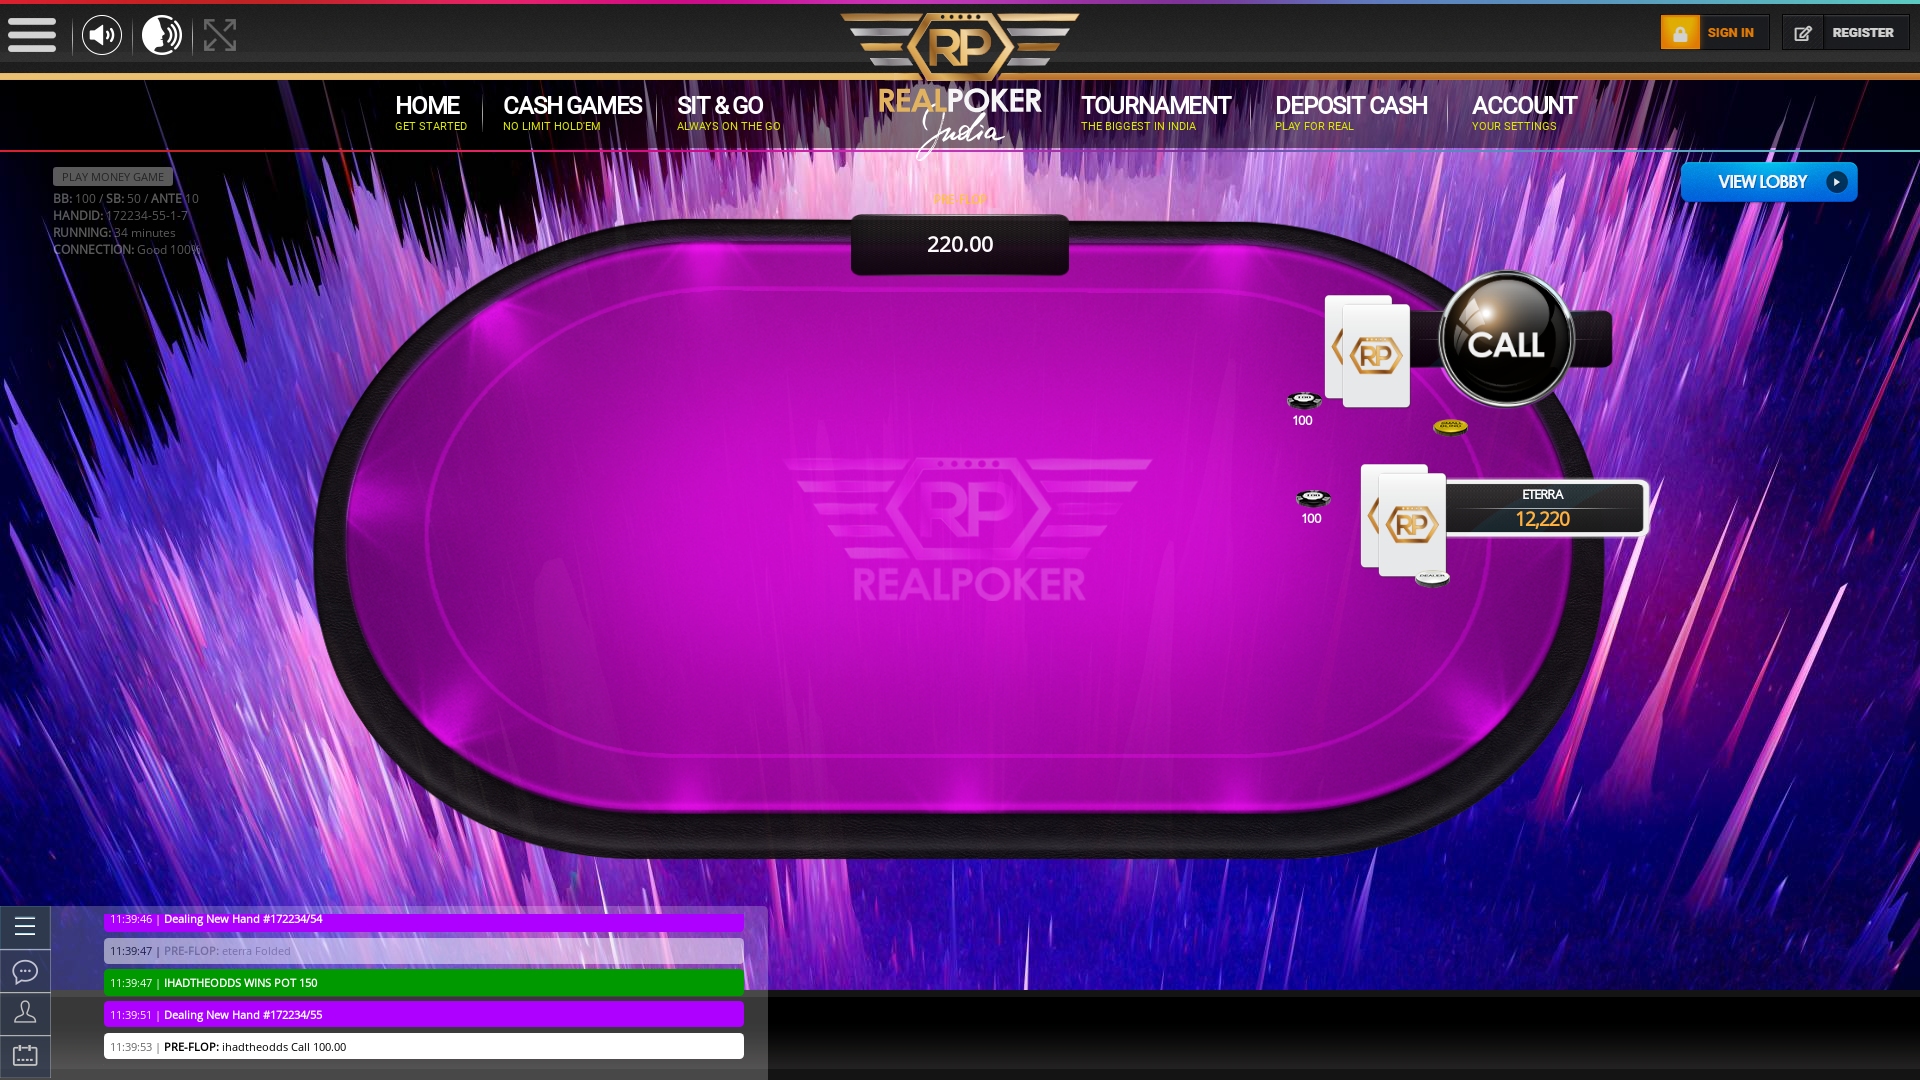 10 player texas holdem table at real poker with the table id 172234